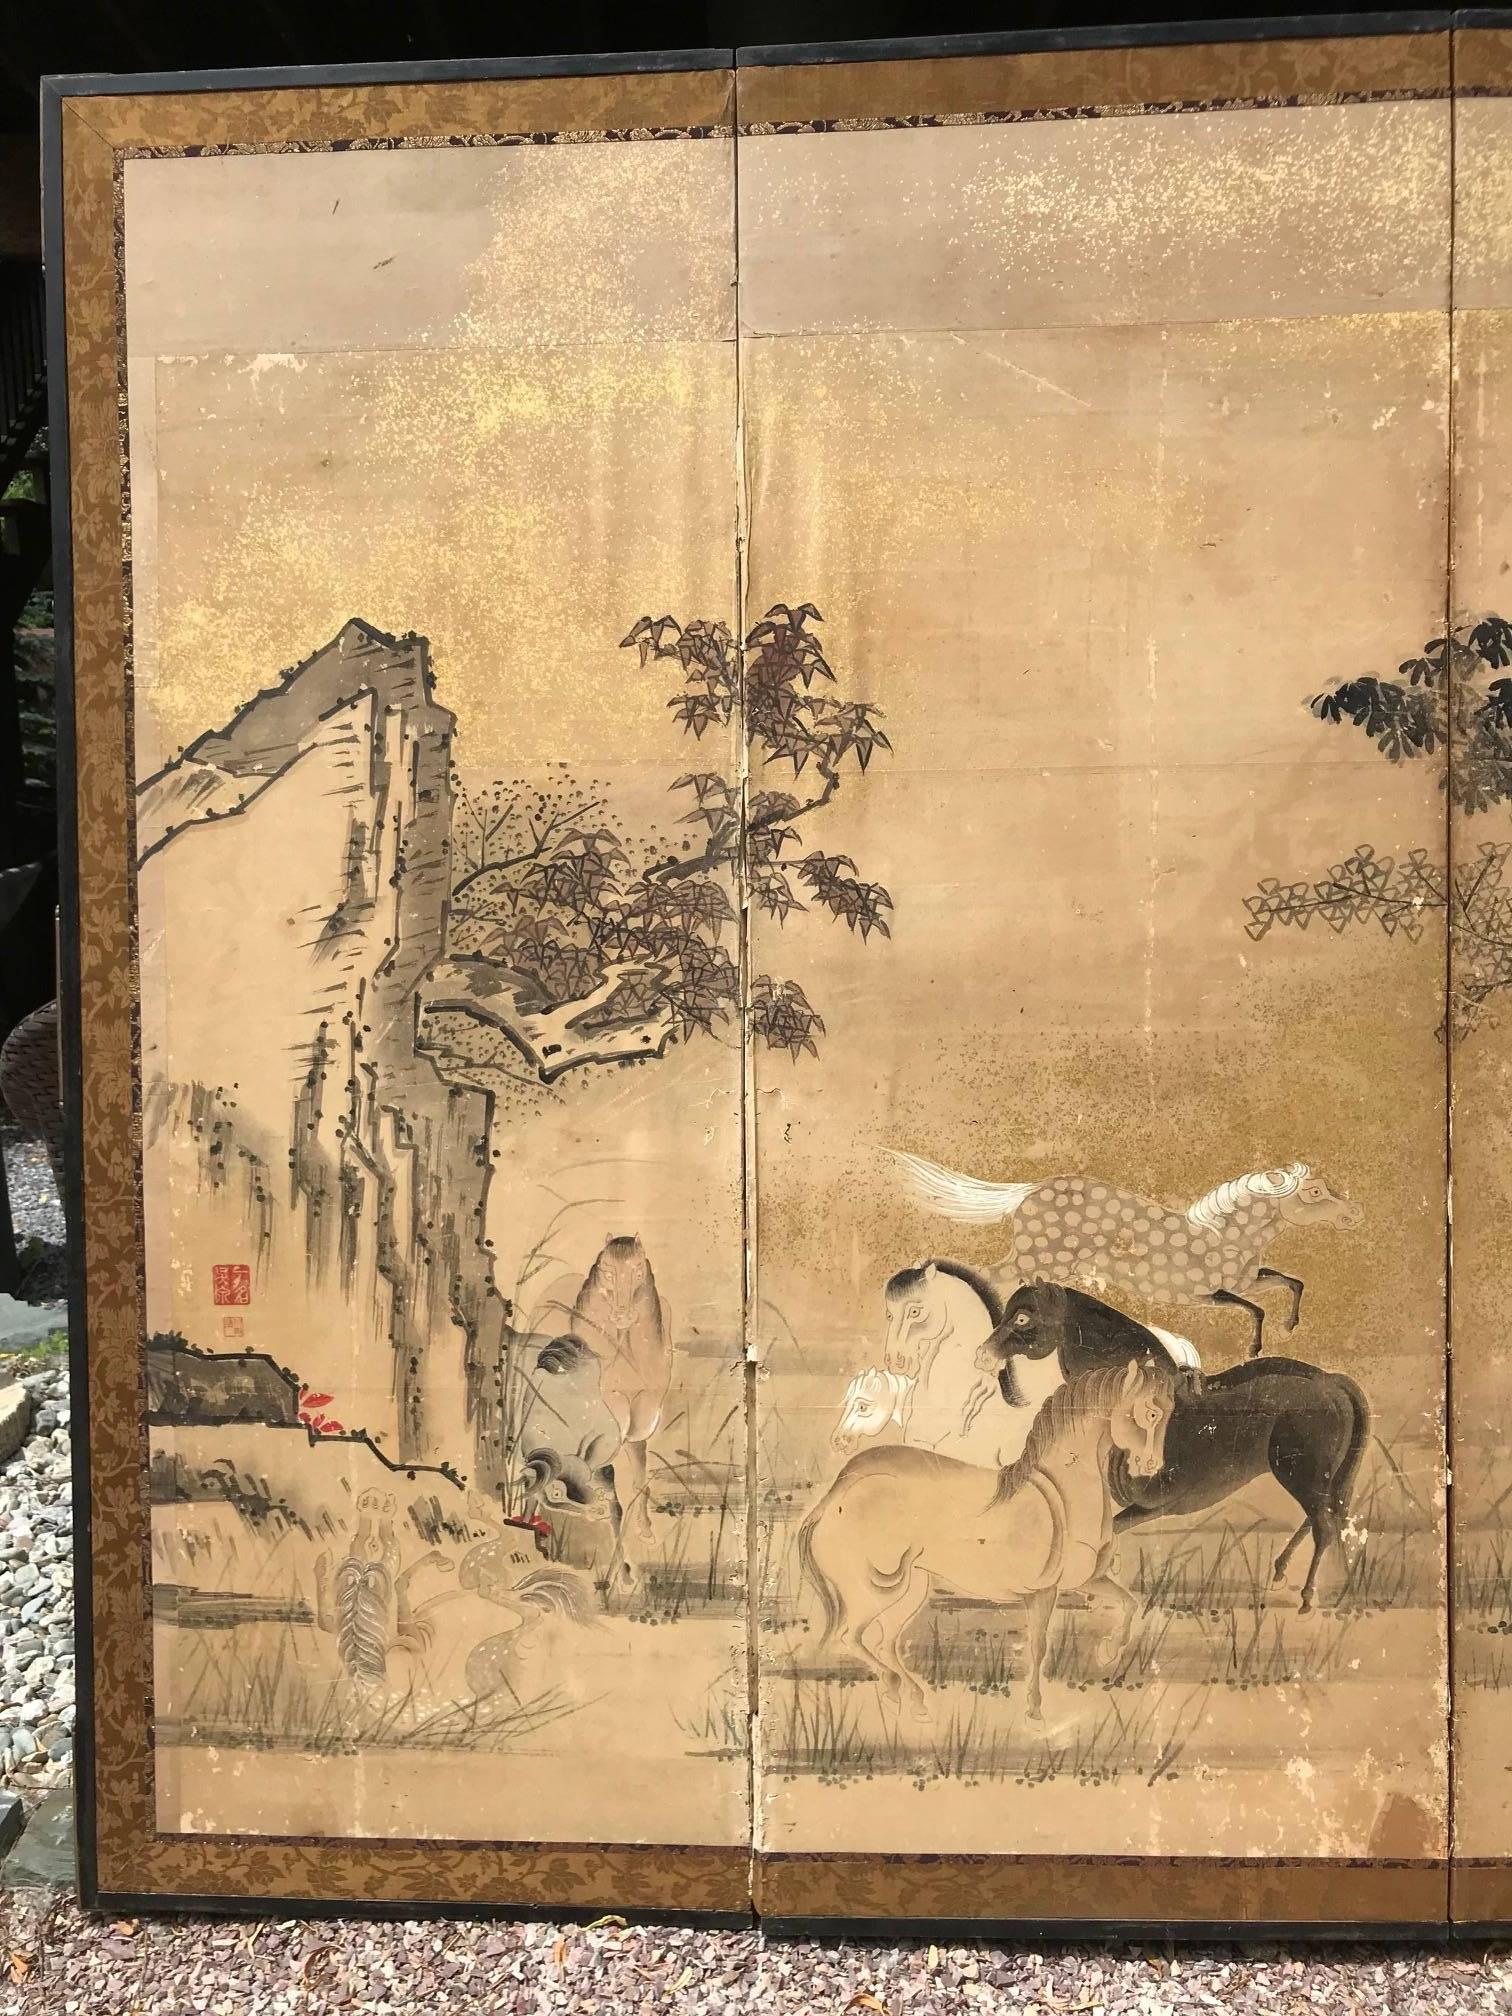 Japan, an early six-panel screen Byobu depicting 22 Horses frolicking among mountains and pines. This attractive screen dates to the Edo period, circa 1850.

Horses are a scarce motif for Japanese screens and we are pleased to have found this one